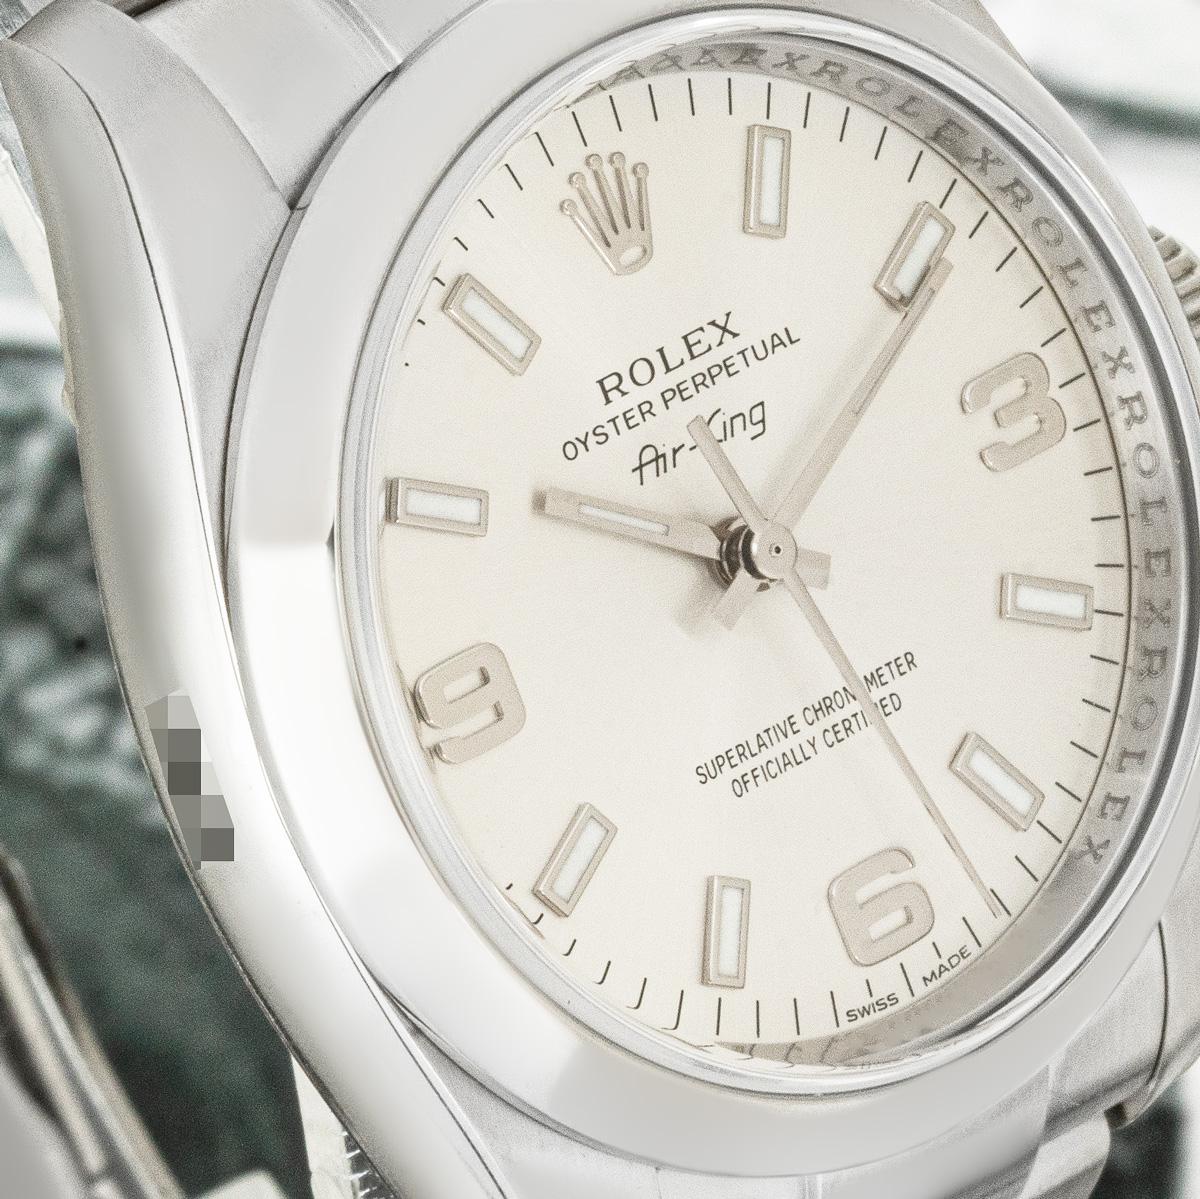 Rolex NOS Air-King Hard Rock Cafe 114200 In Excellent Condition For Sale In London, GB